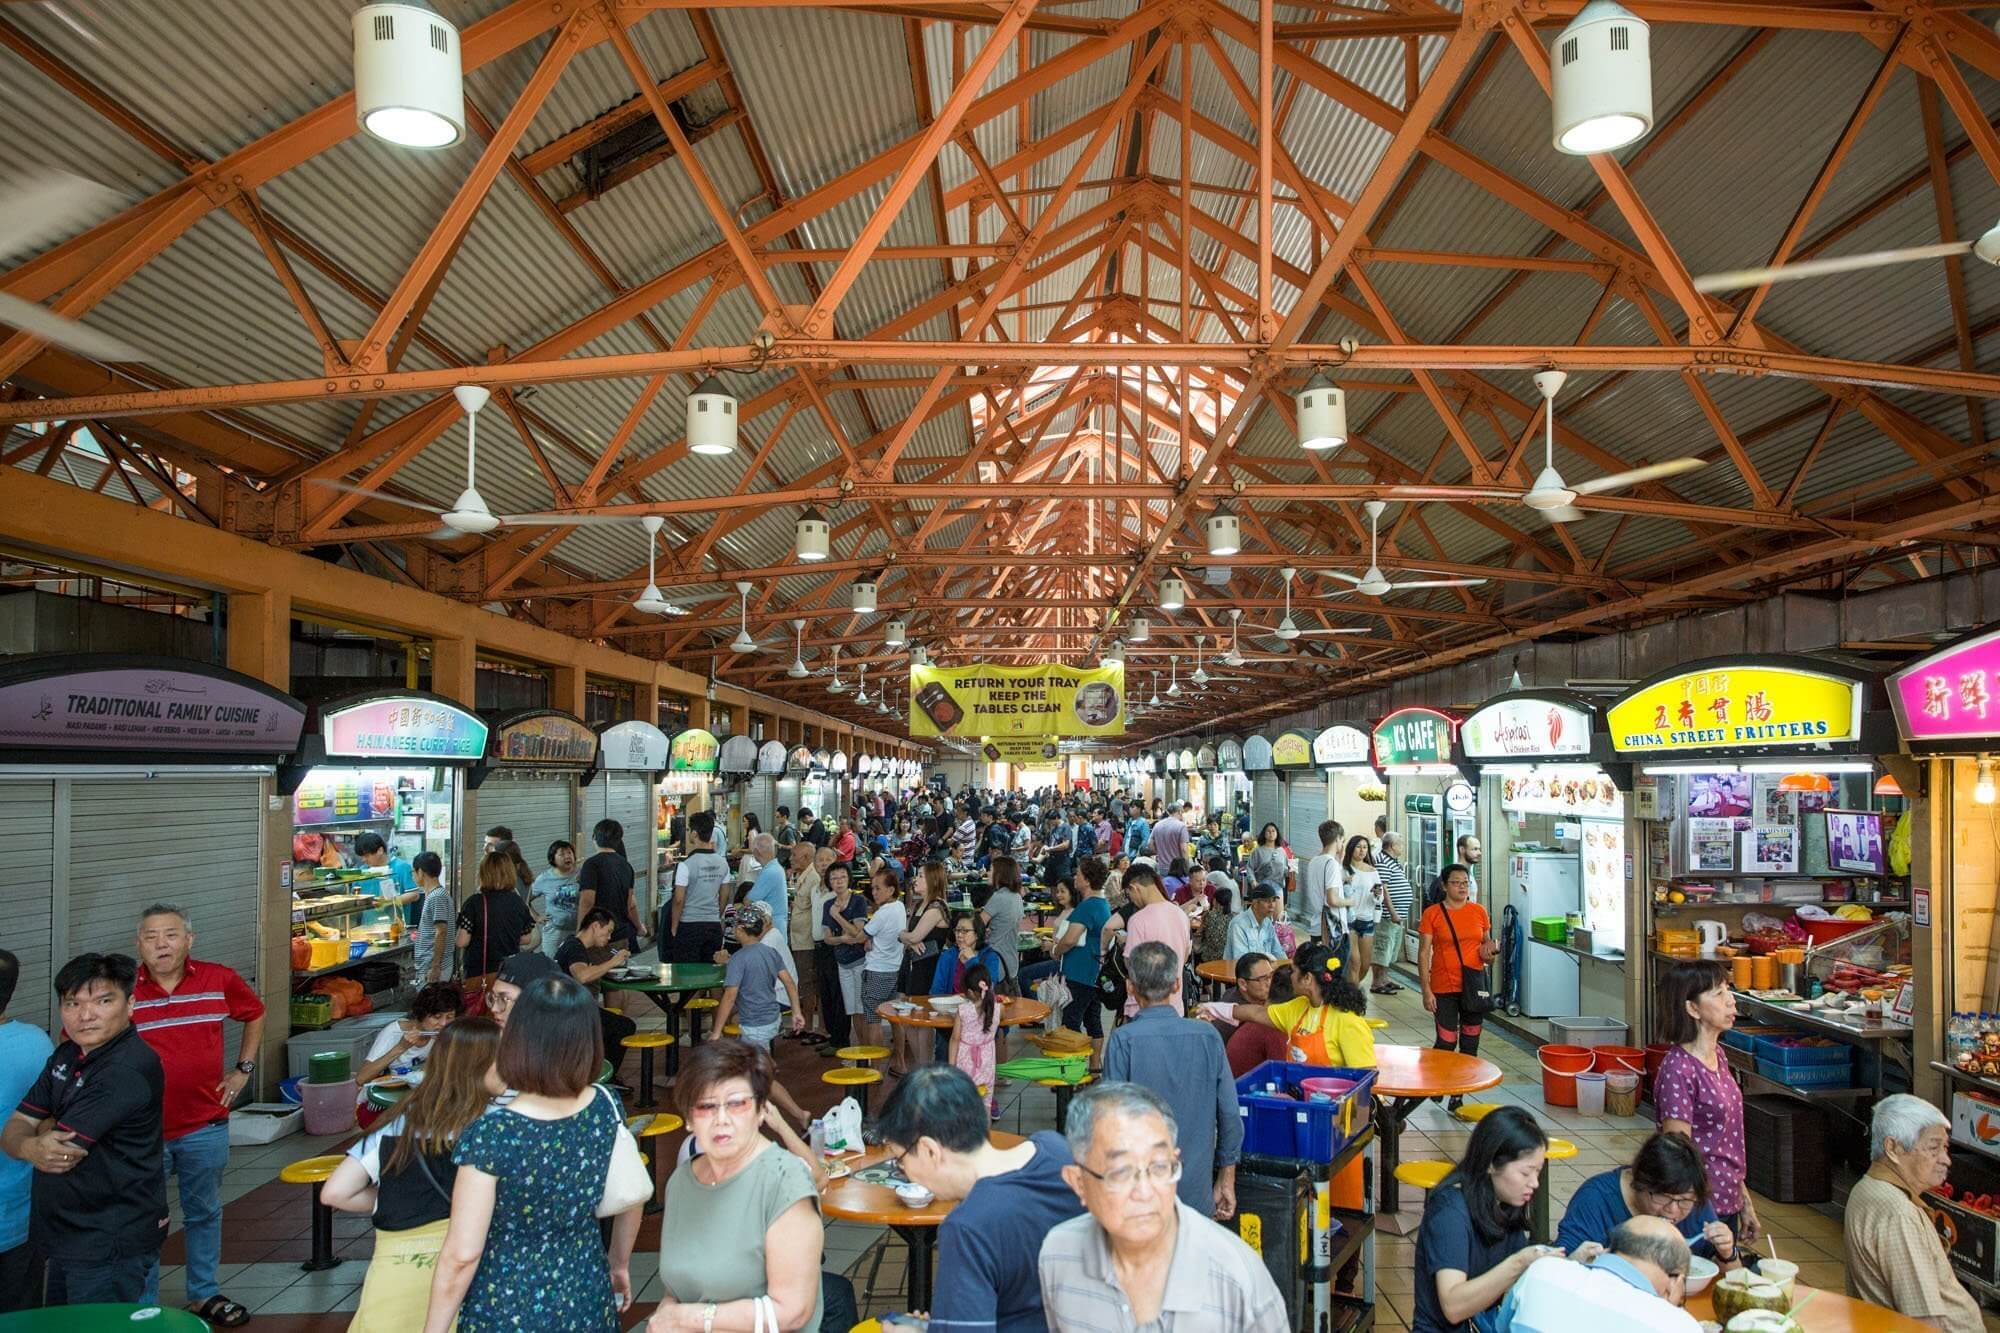 Hawker stalls inside the Maxwell Food Centre in Singapore